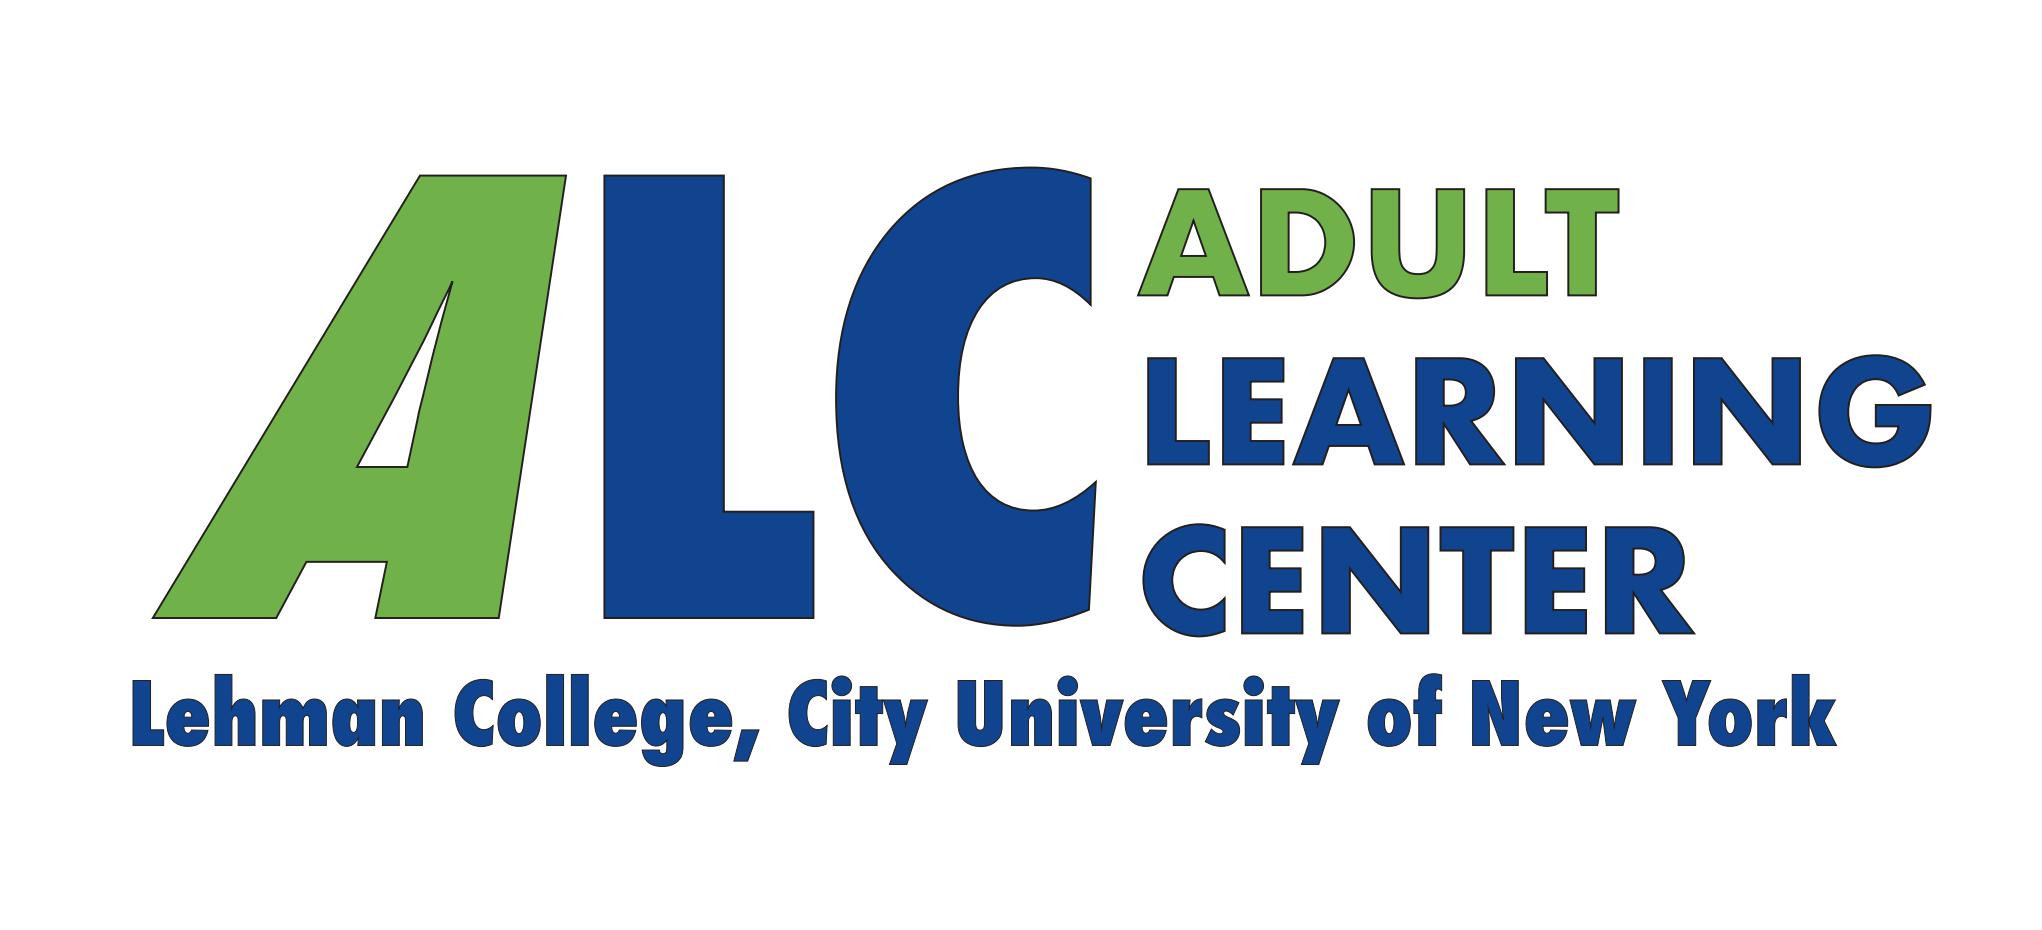 Lehman College Adult Learning Center logo